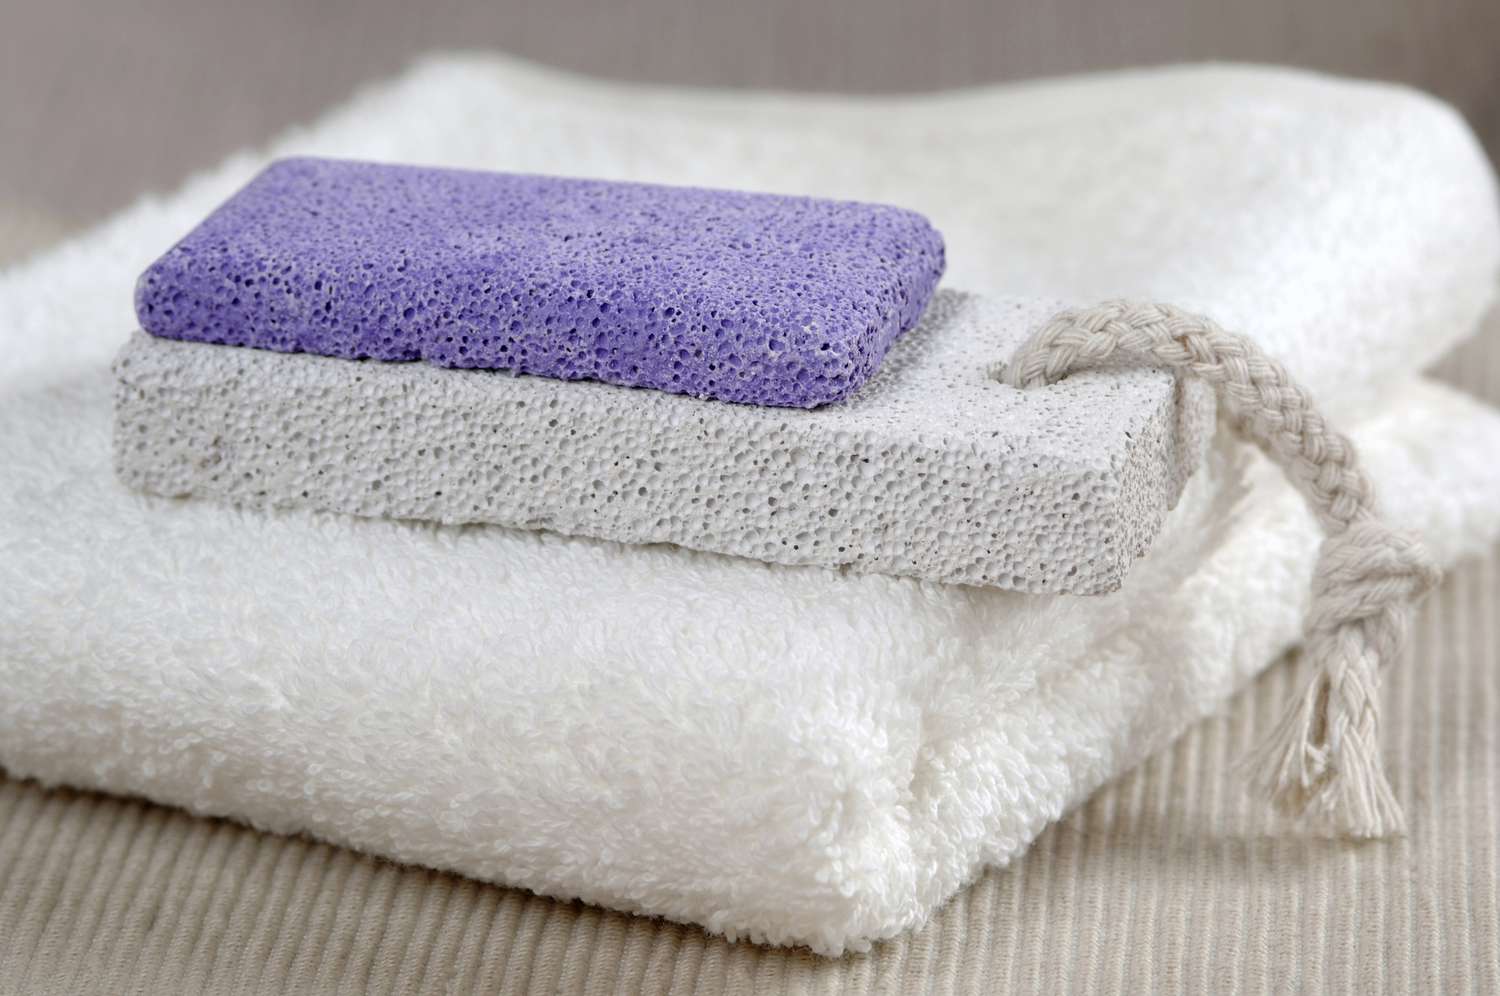 two pumice stones sit atop a towel.